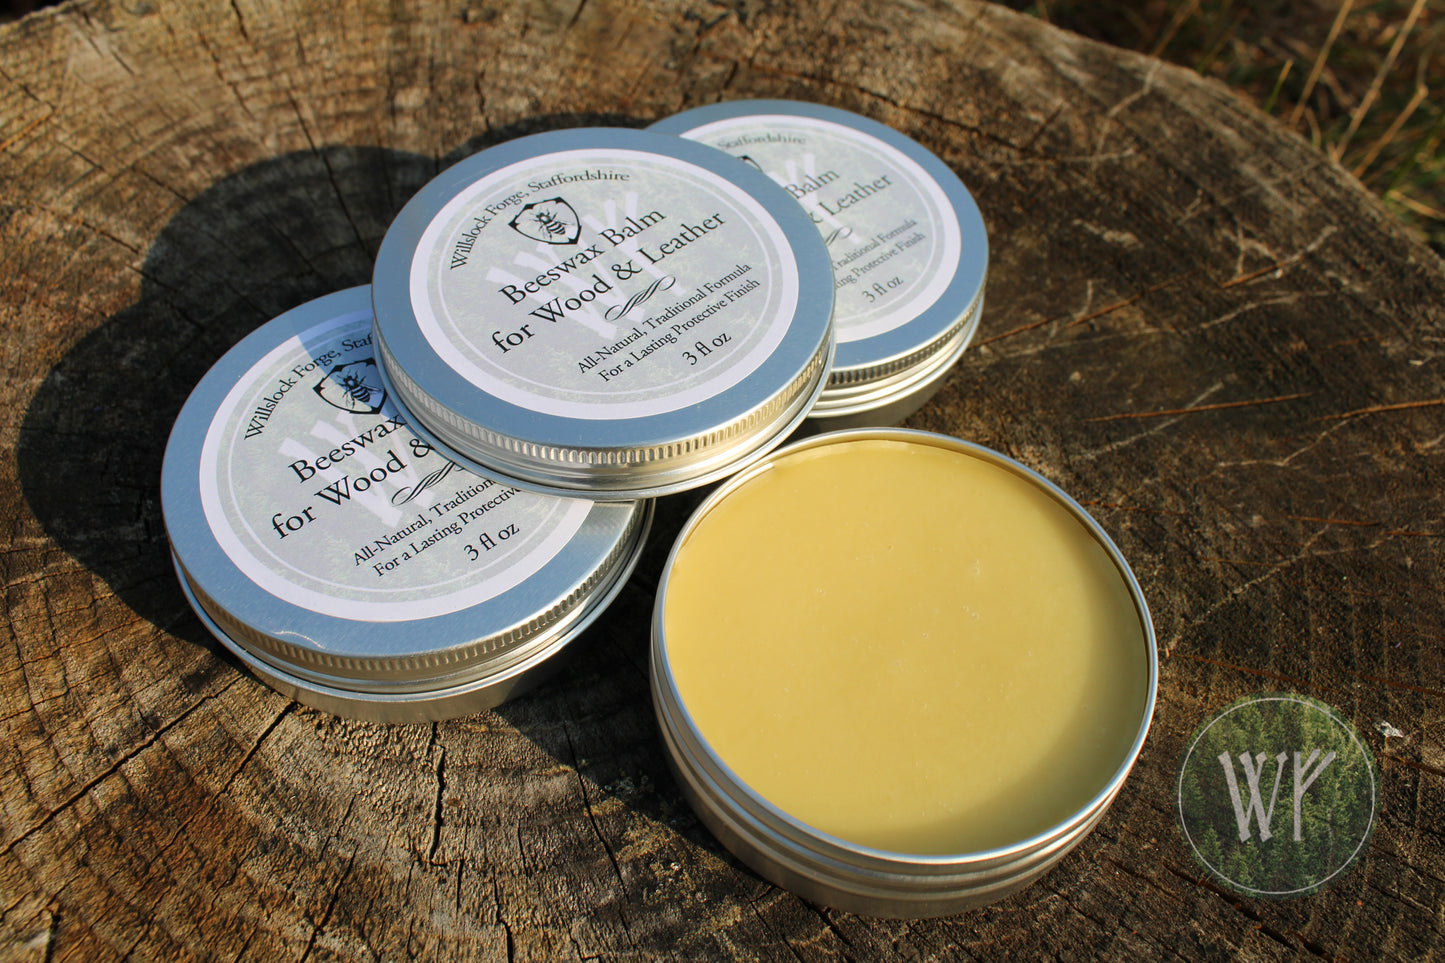 Willslock Forge Beeswax Balm Wood & Leather Treatment